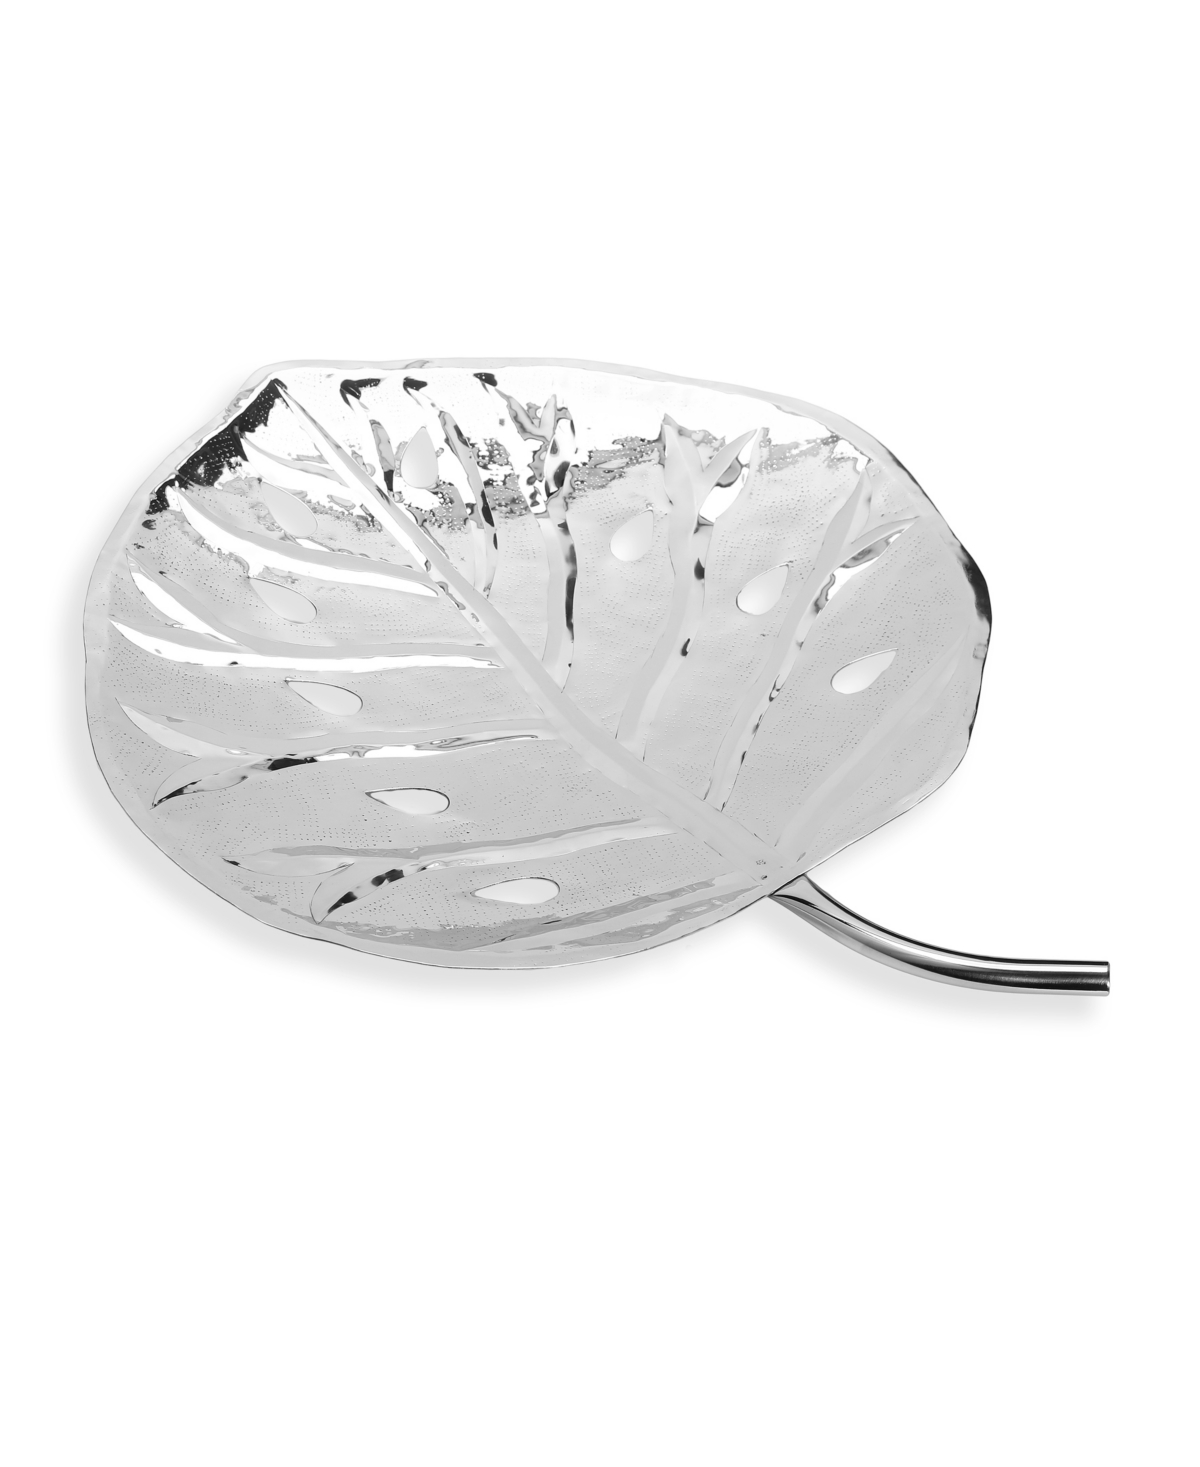 Stainless Steel Leaf Dish, 16" L - Silver